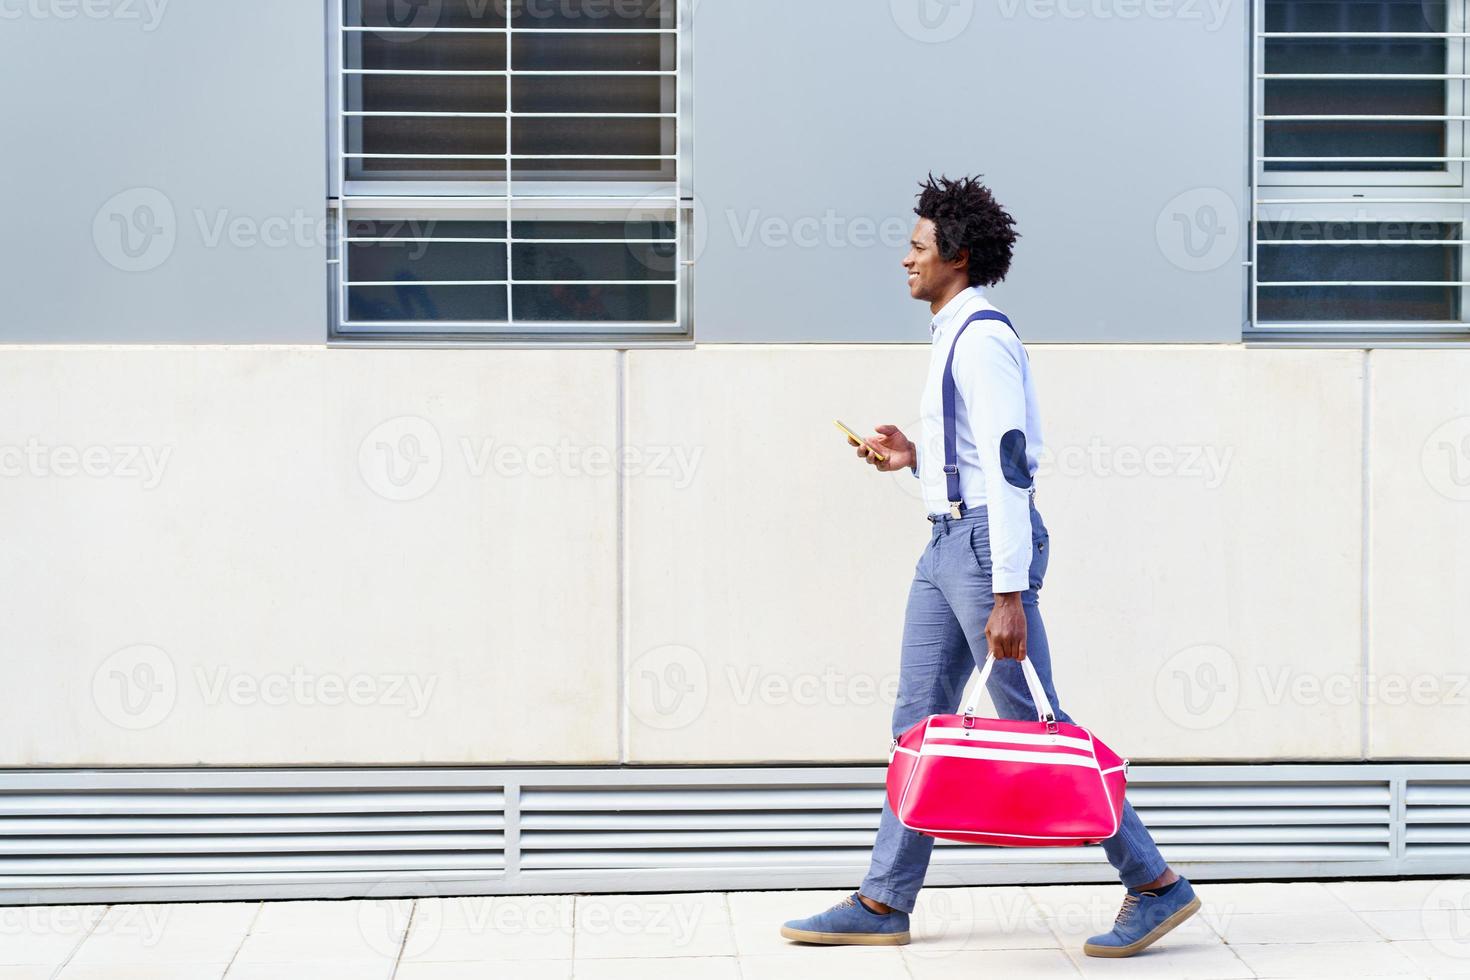 Black man with afro hairstyle carrying a sports bag photo